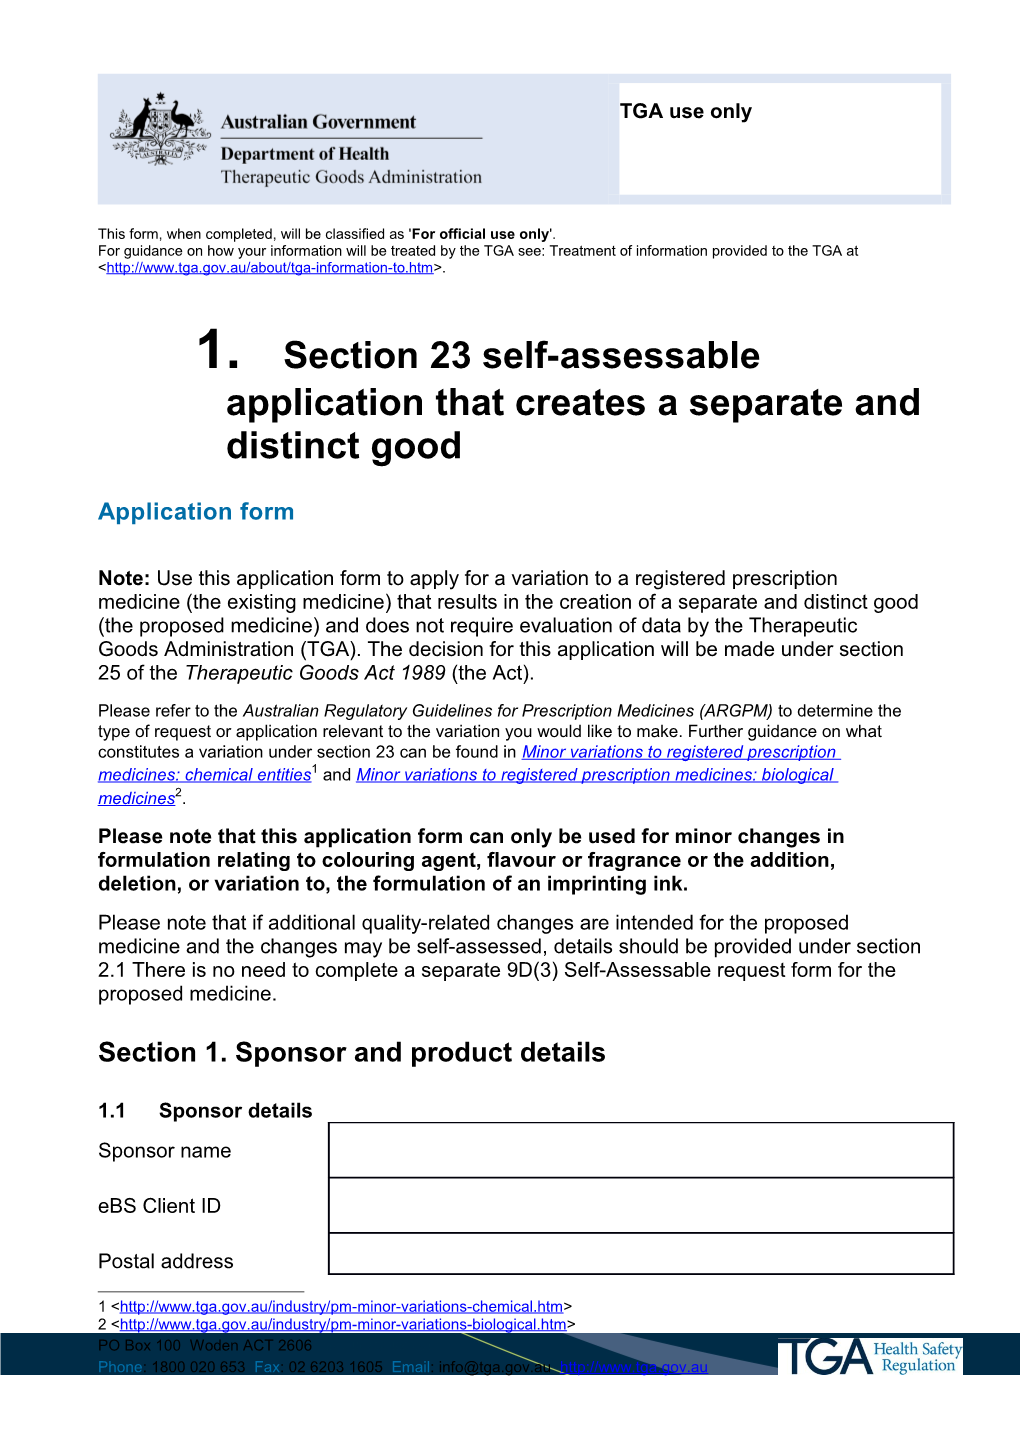 Section 23 Self-Assessable Application That Creates a Separate and Distinct Good